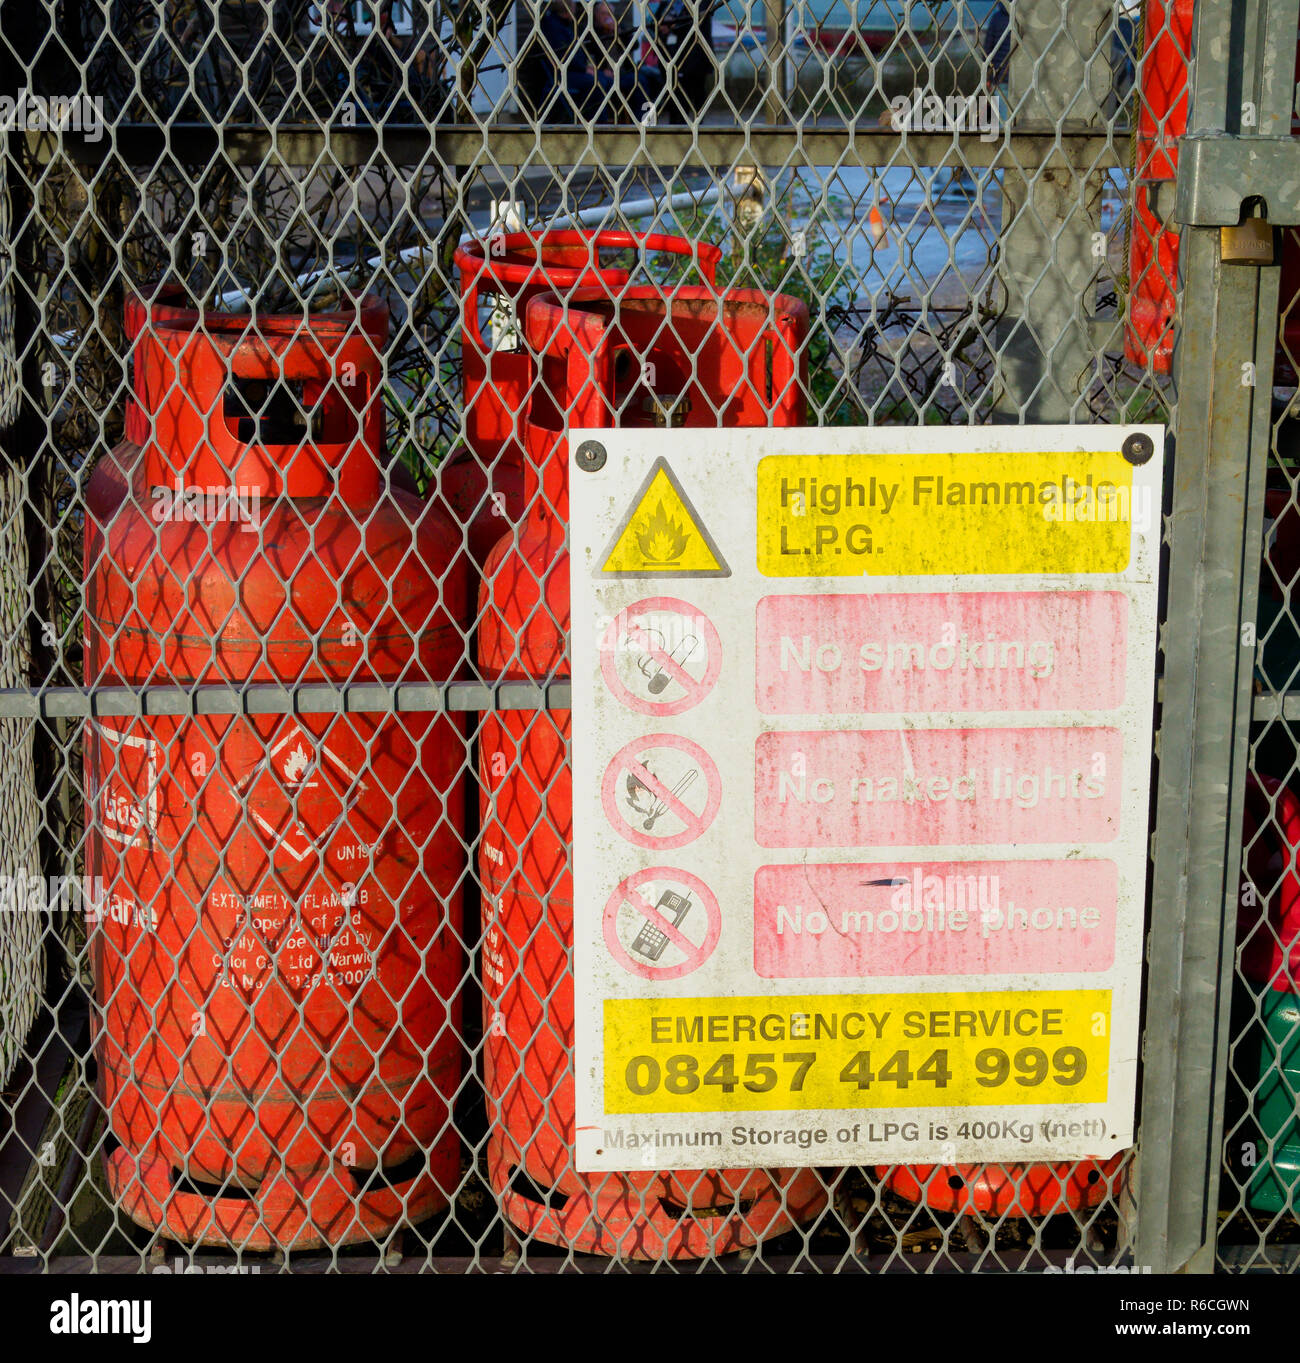 Gas Bottles in locked cage with warning signs Stock Photo